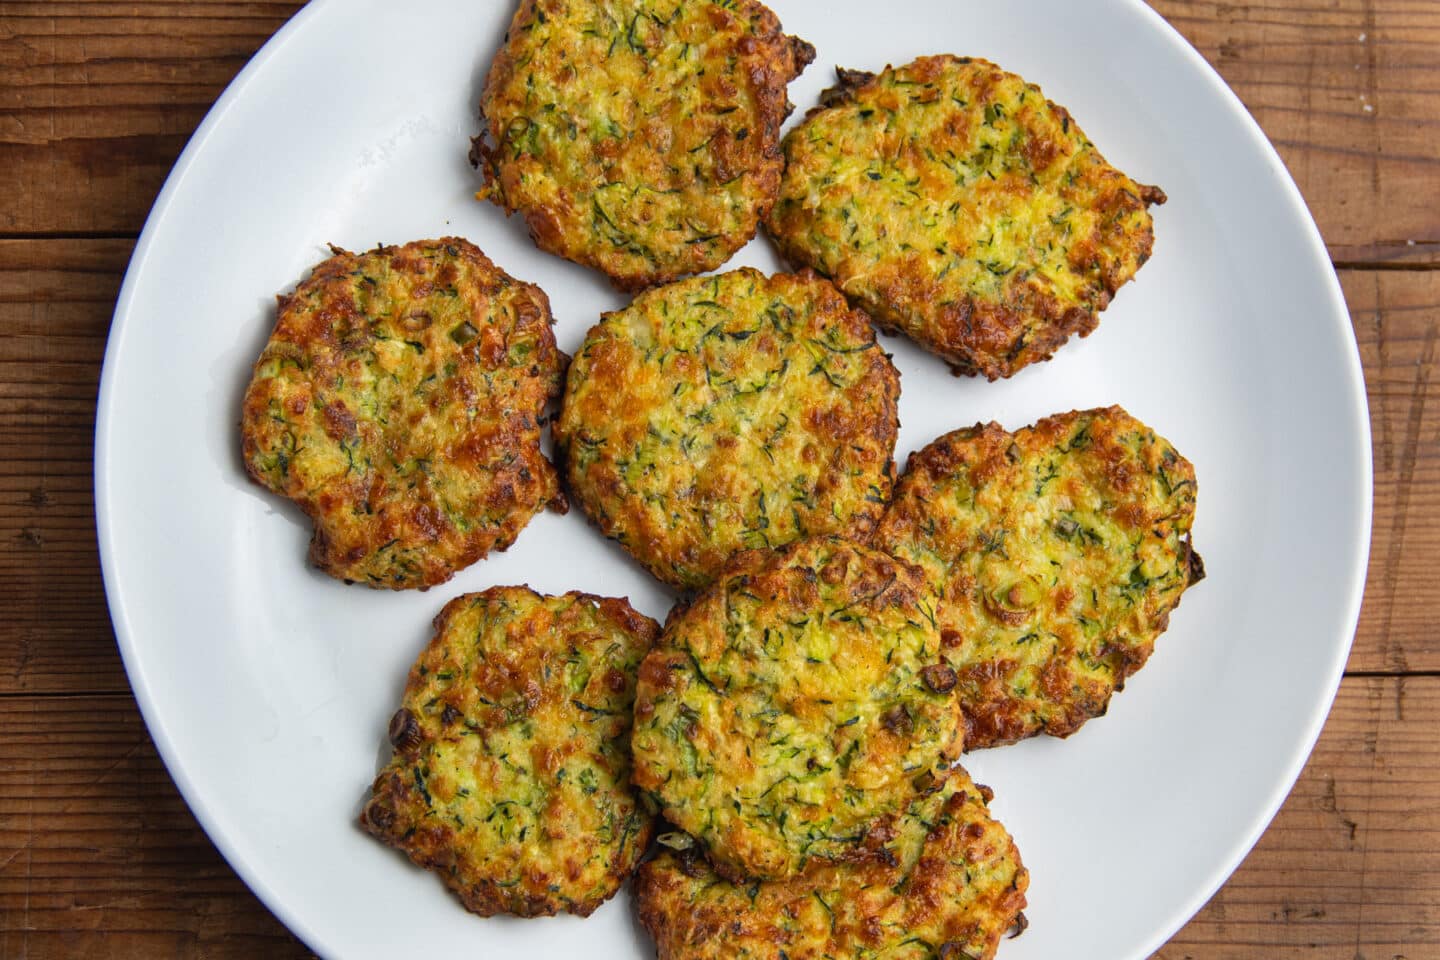 This is a picture of the cooked fritters on a plate.